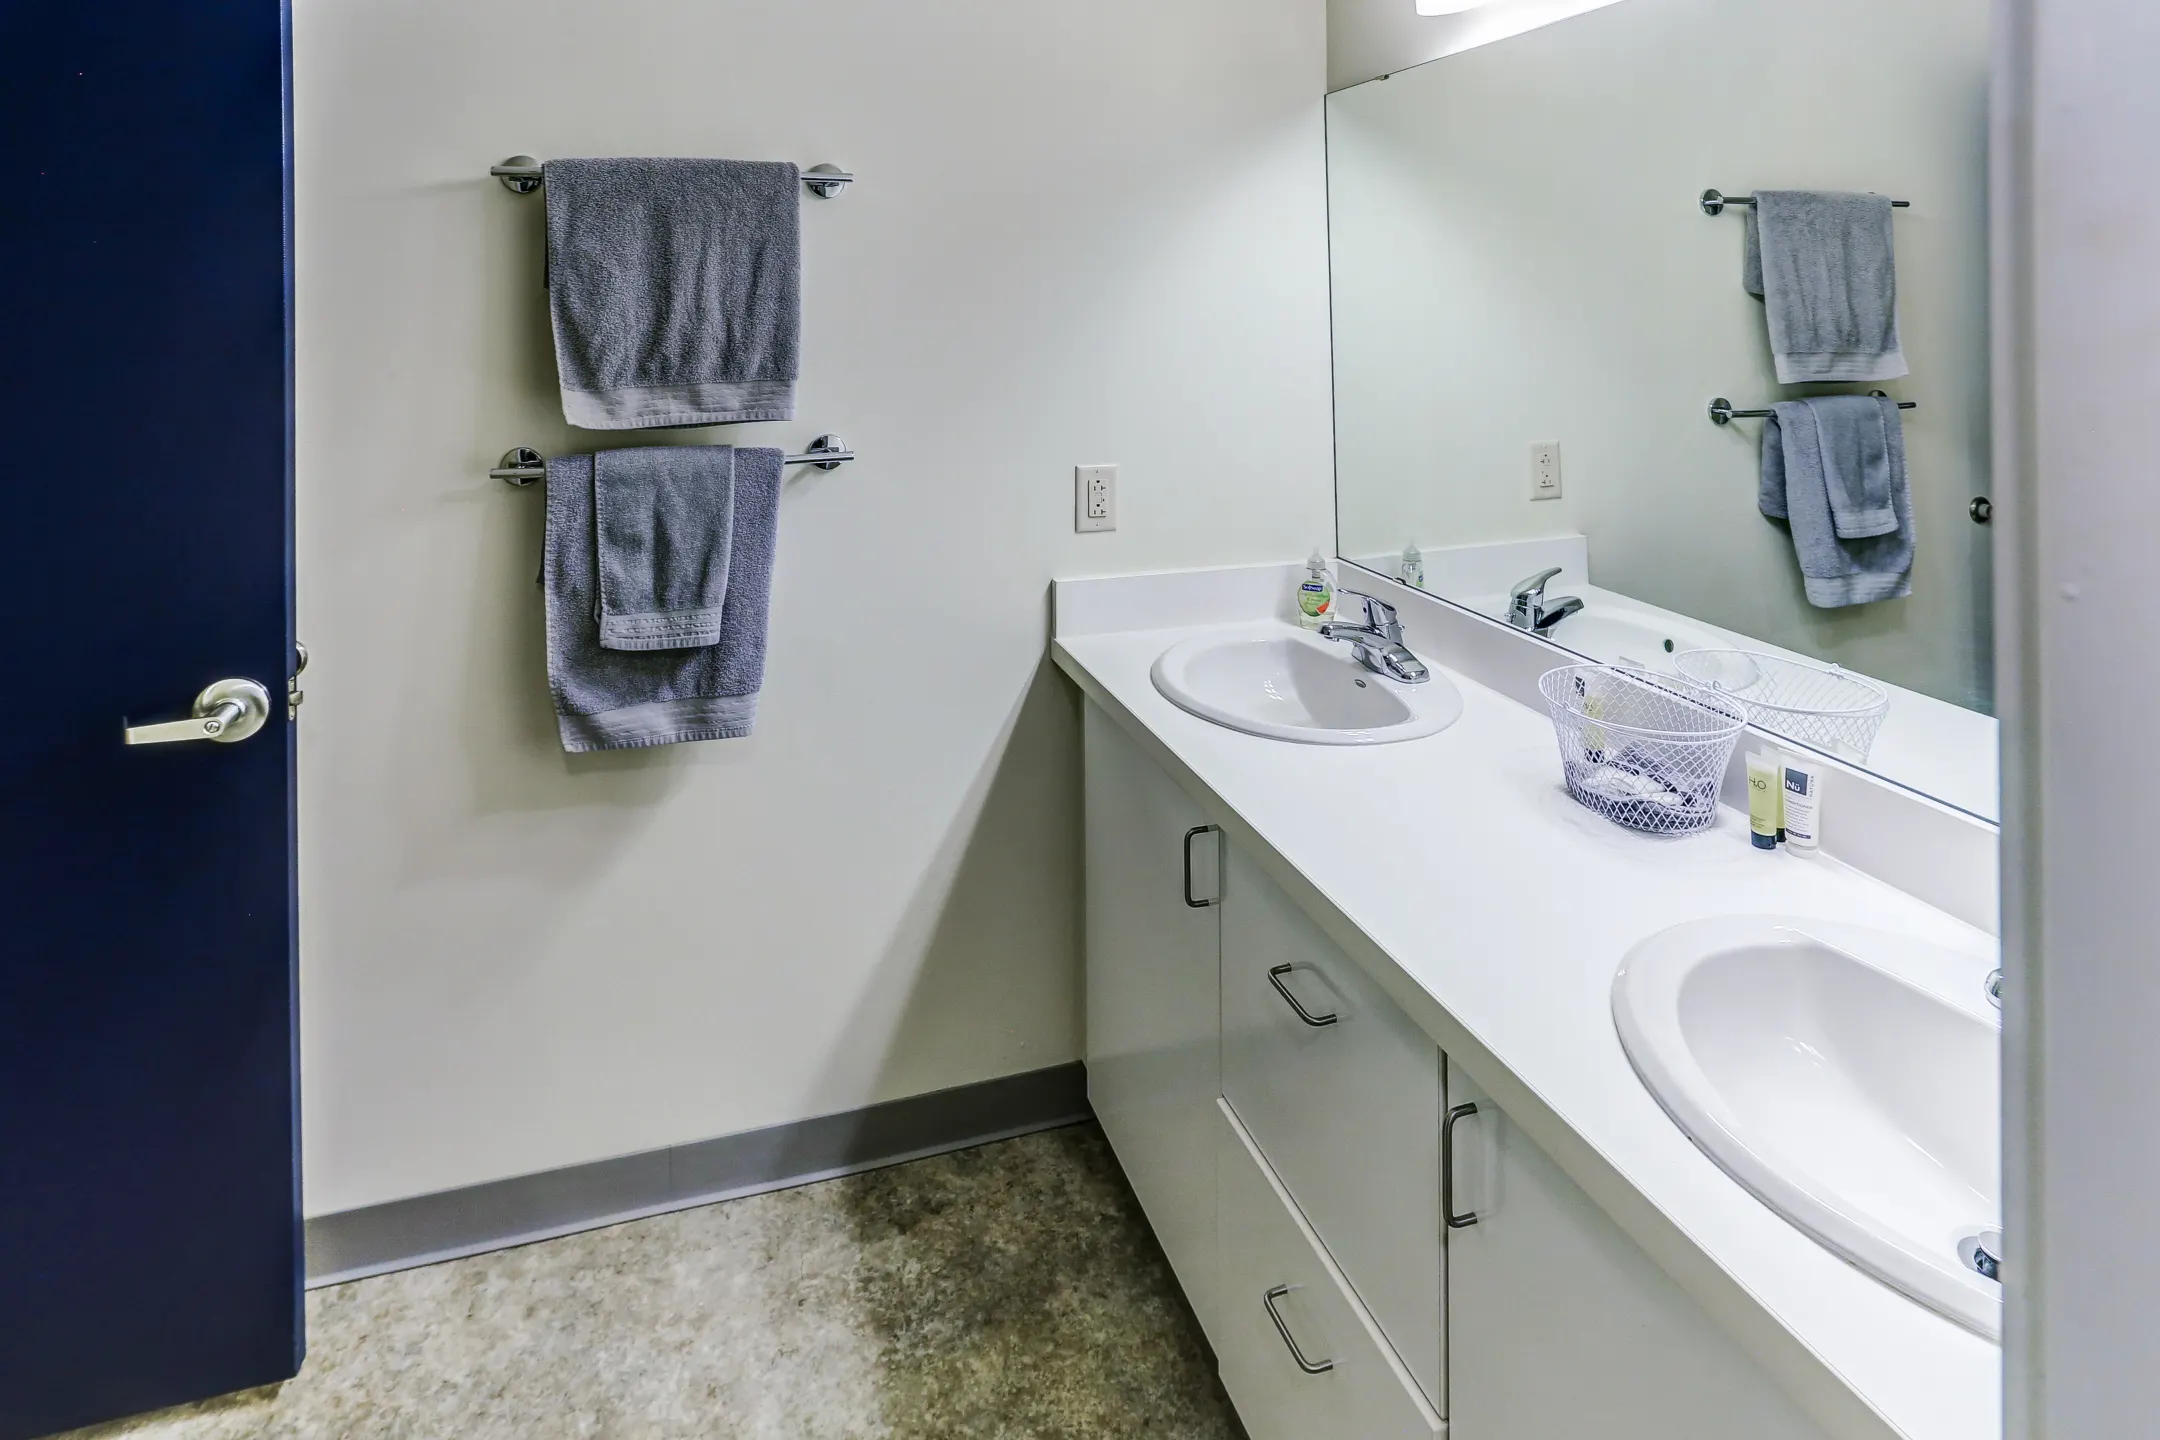 Bathroom - Copper Beech Commons - Per Bed Lease - Syracuse, NY